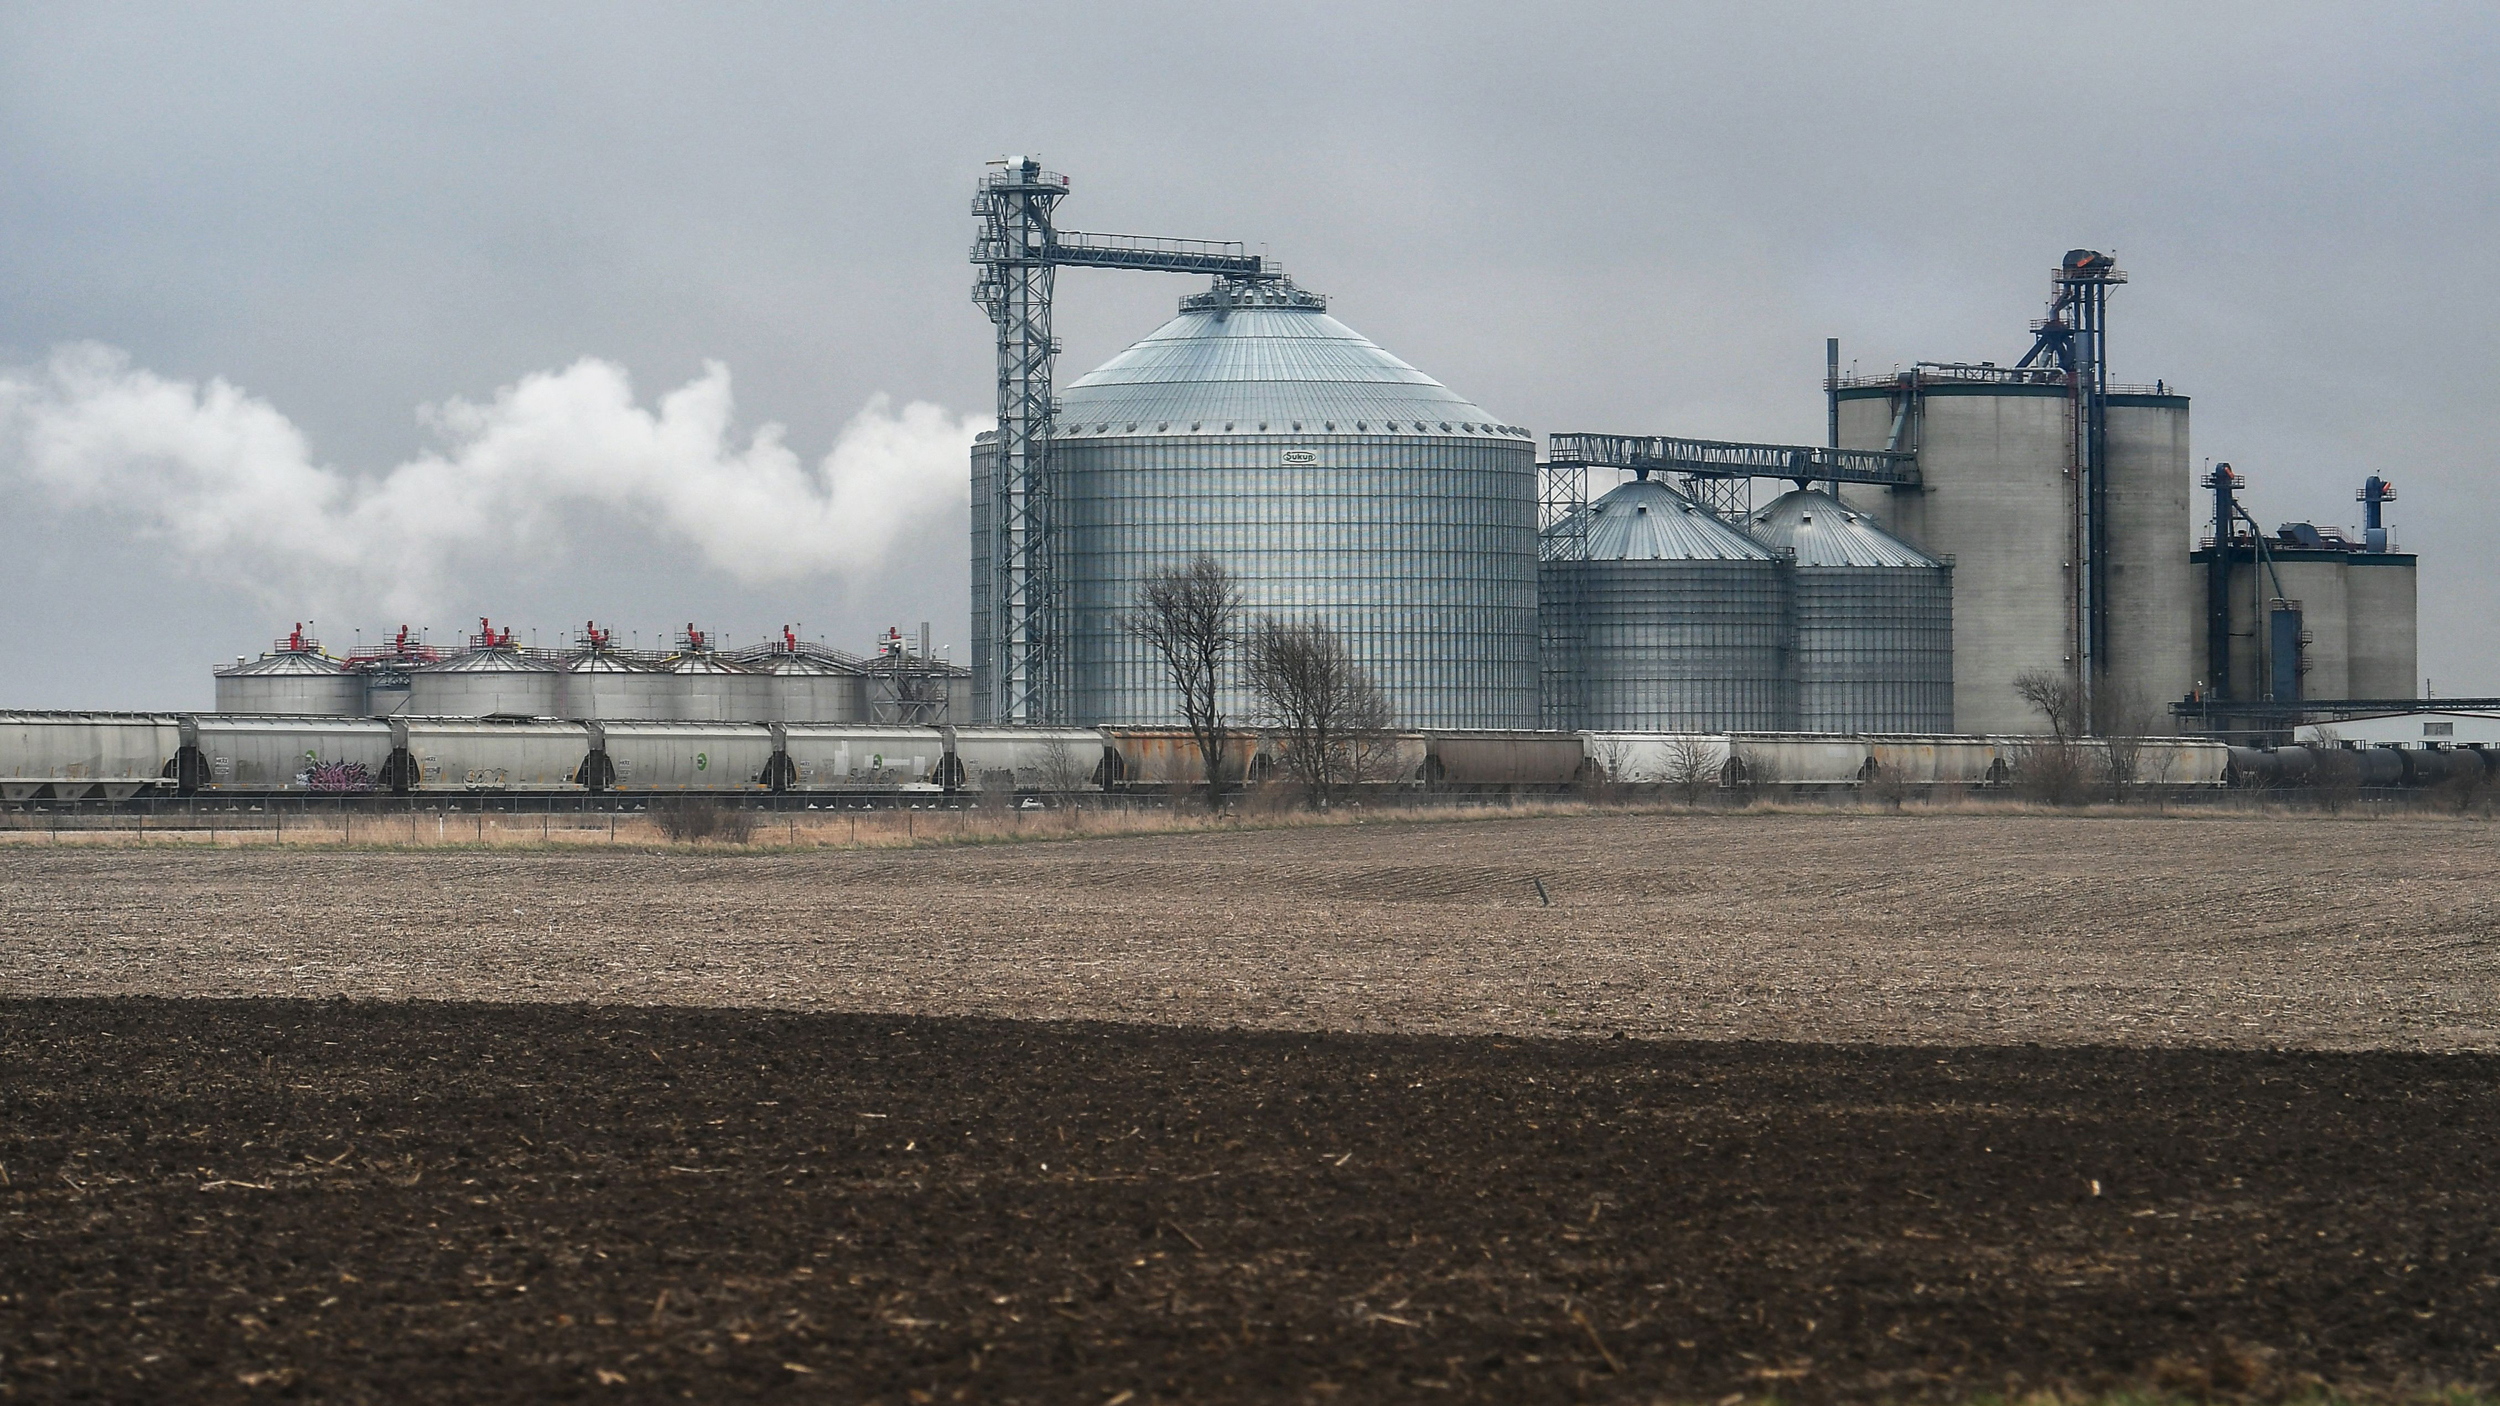 Carbon dioxide pipelines transport CO2 captured from ethanol processing plants like this one in Menlo, Iowa. Credit: Mandel Ngan/AFP via Getty Images